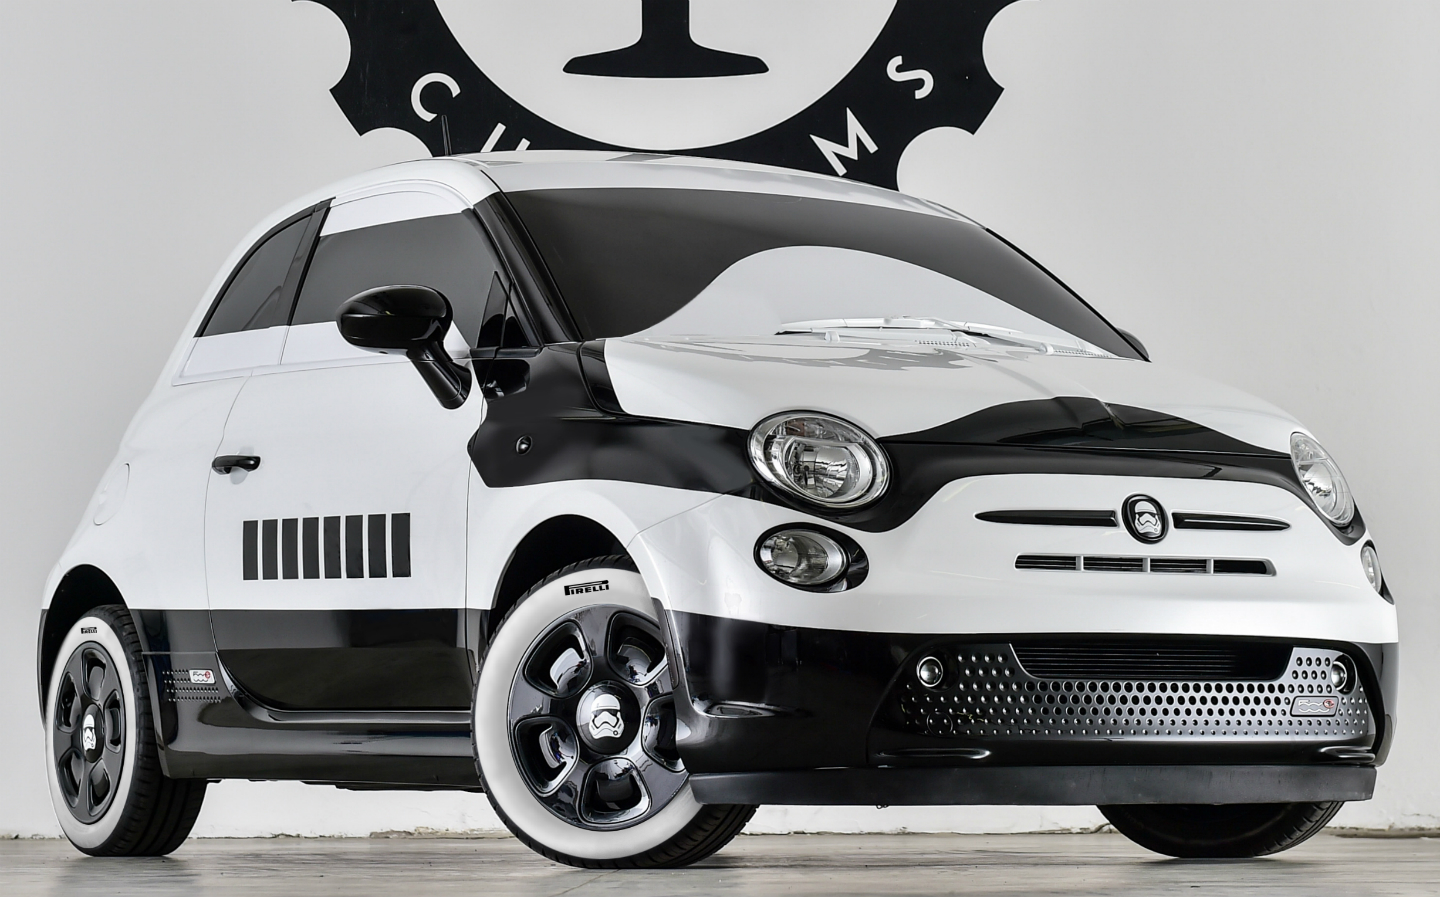 Top 5 Star Wars-inspired special edition cars 2015 Fiat 500e Stormtrooper